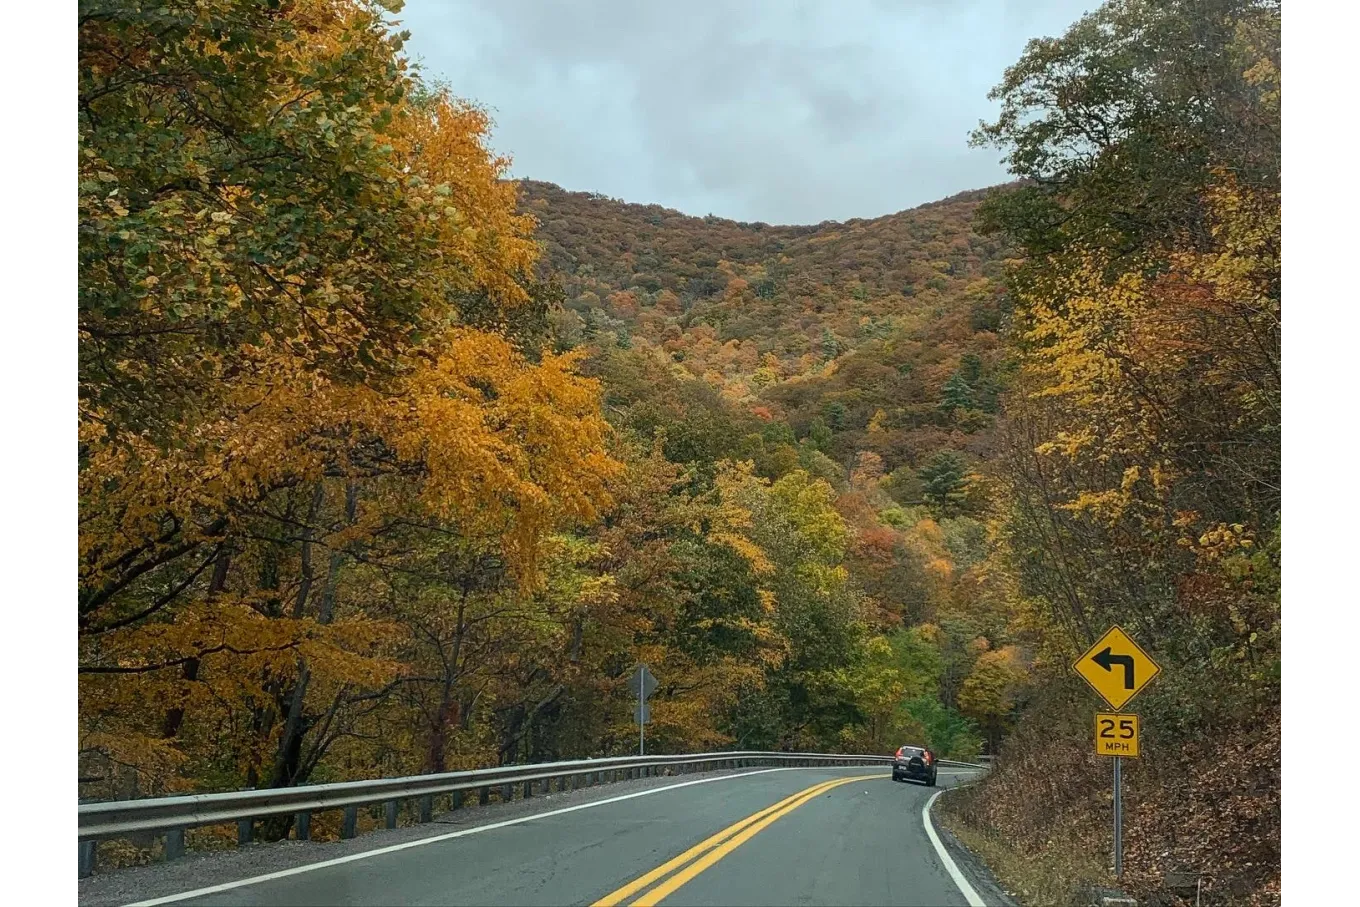 Photo of a road in West Virginia mountains during fall.